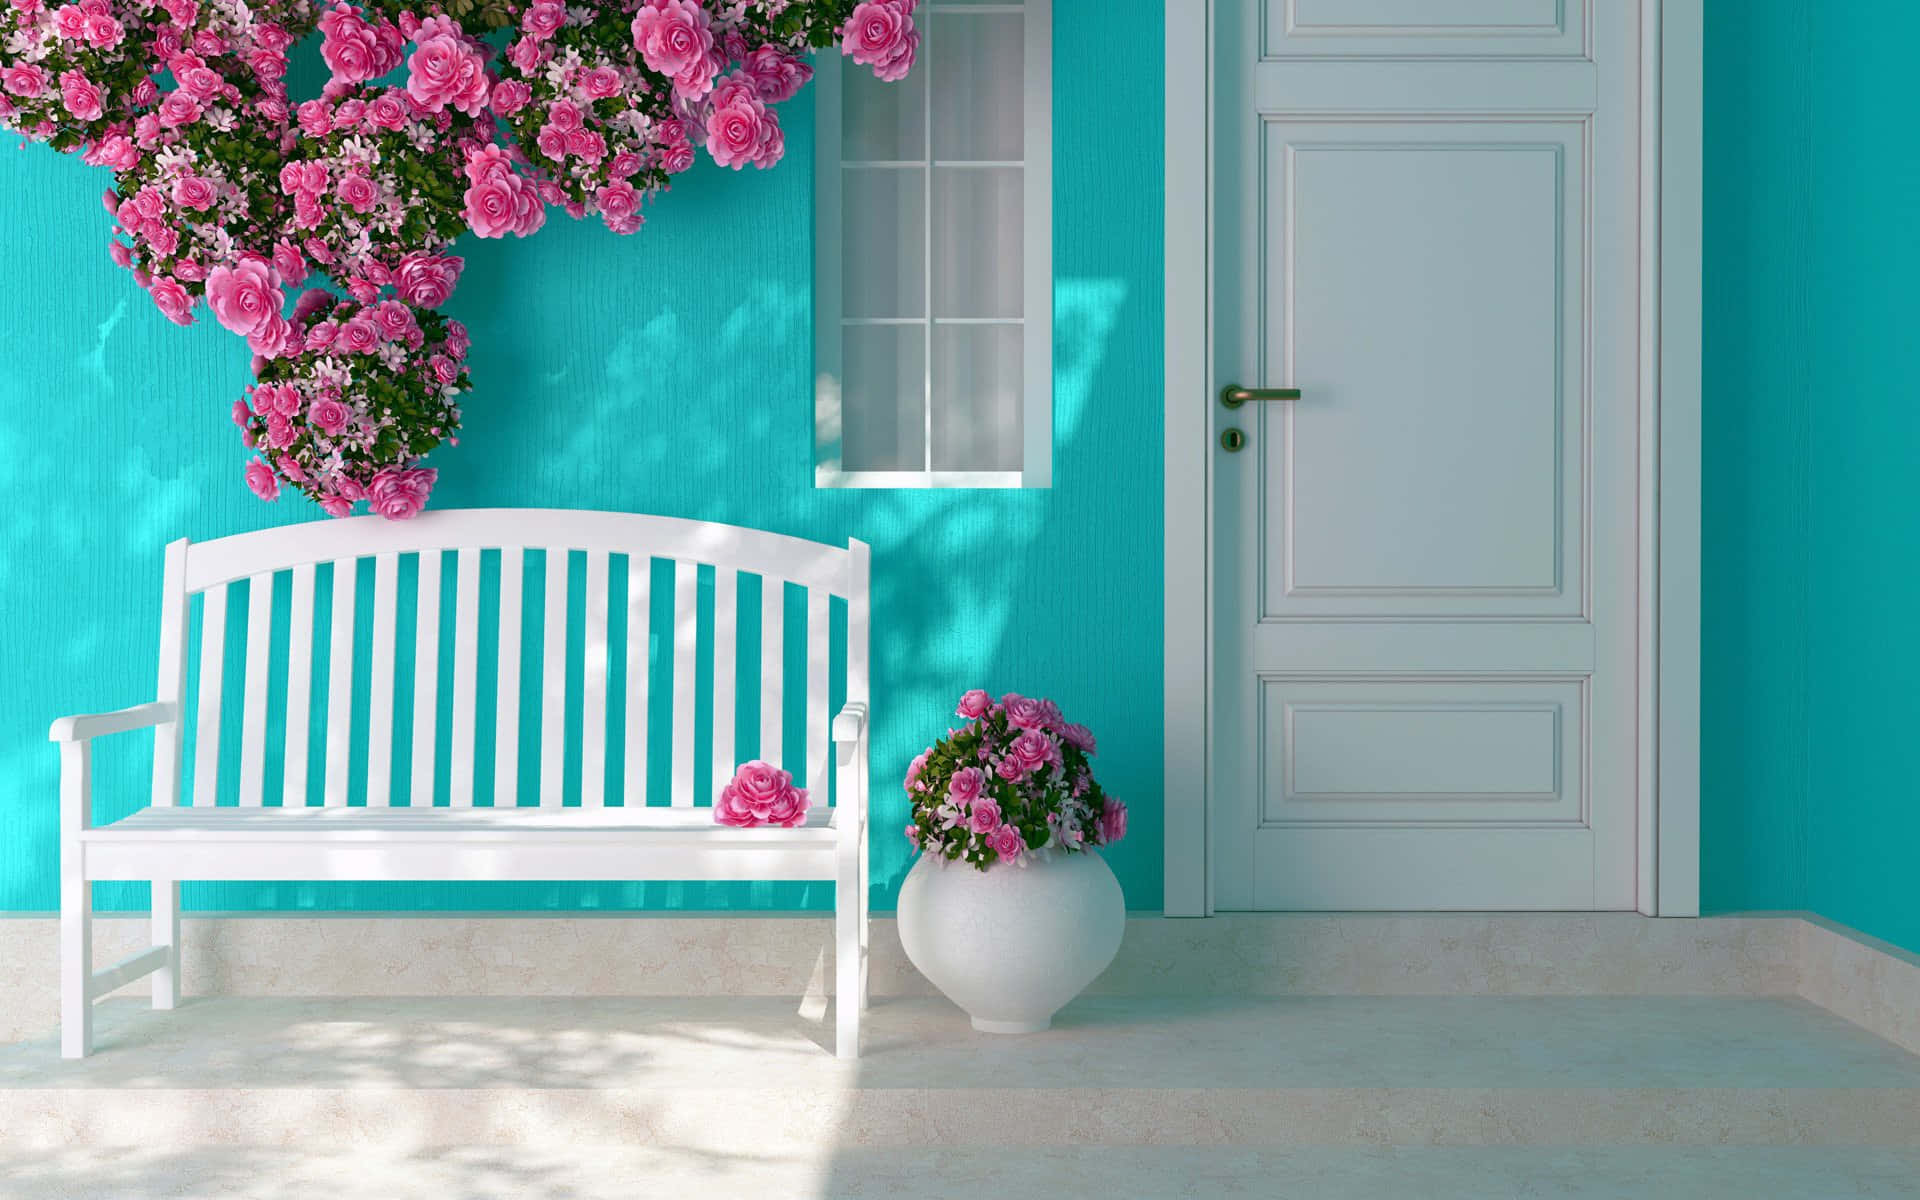 A Welcoming White-Painted Door